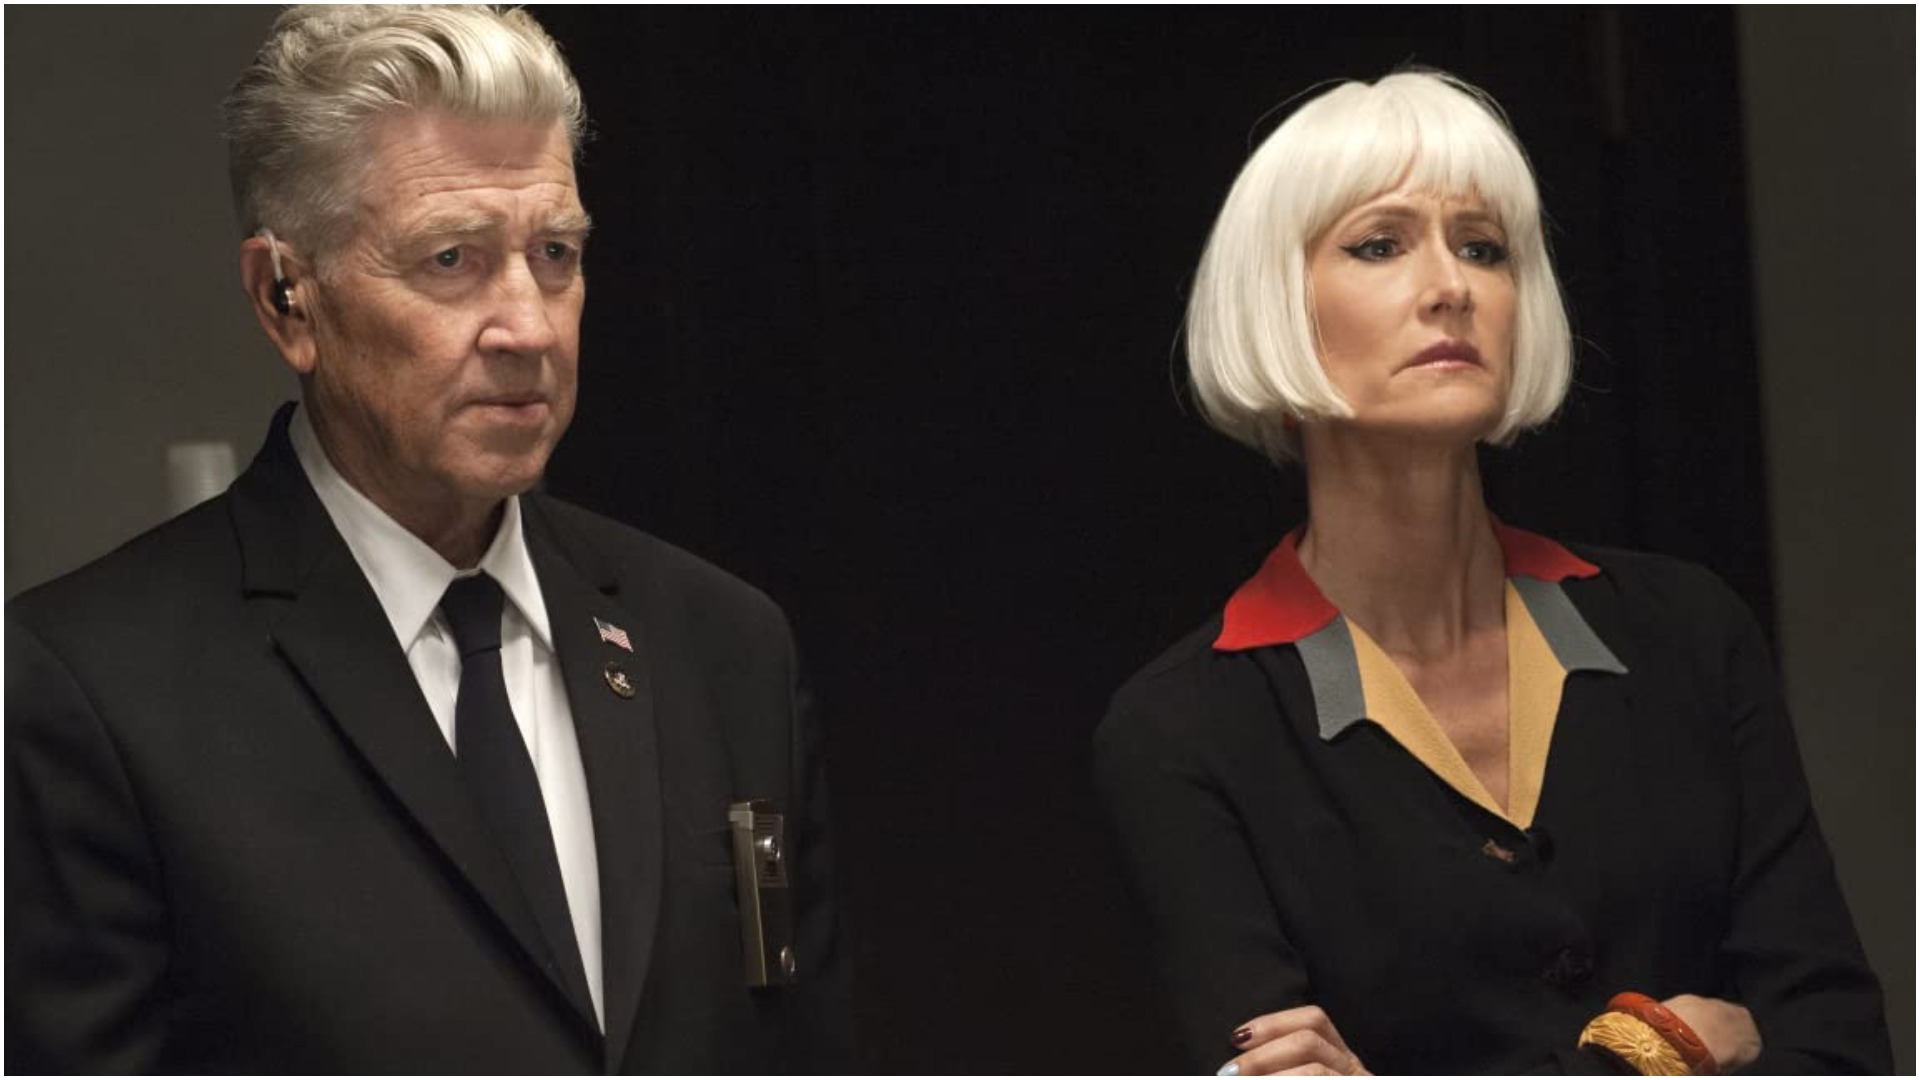 A secret David Lynch movie starring Laura Dern could be coming to Cannes